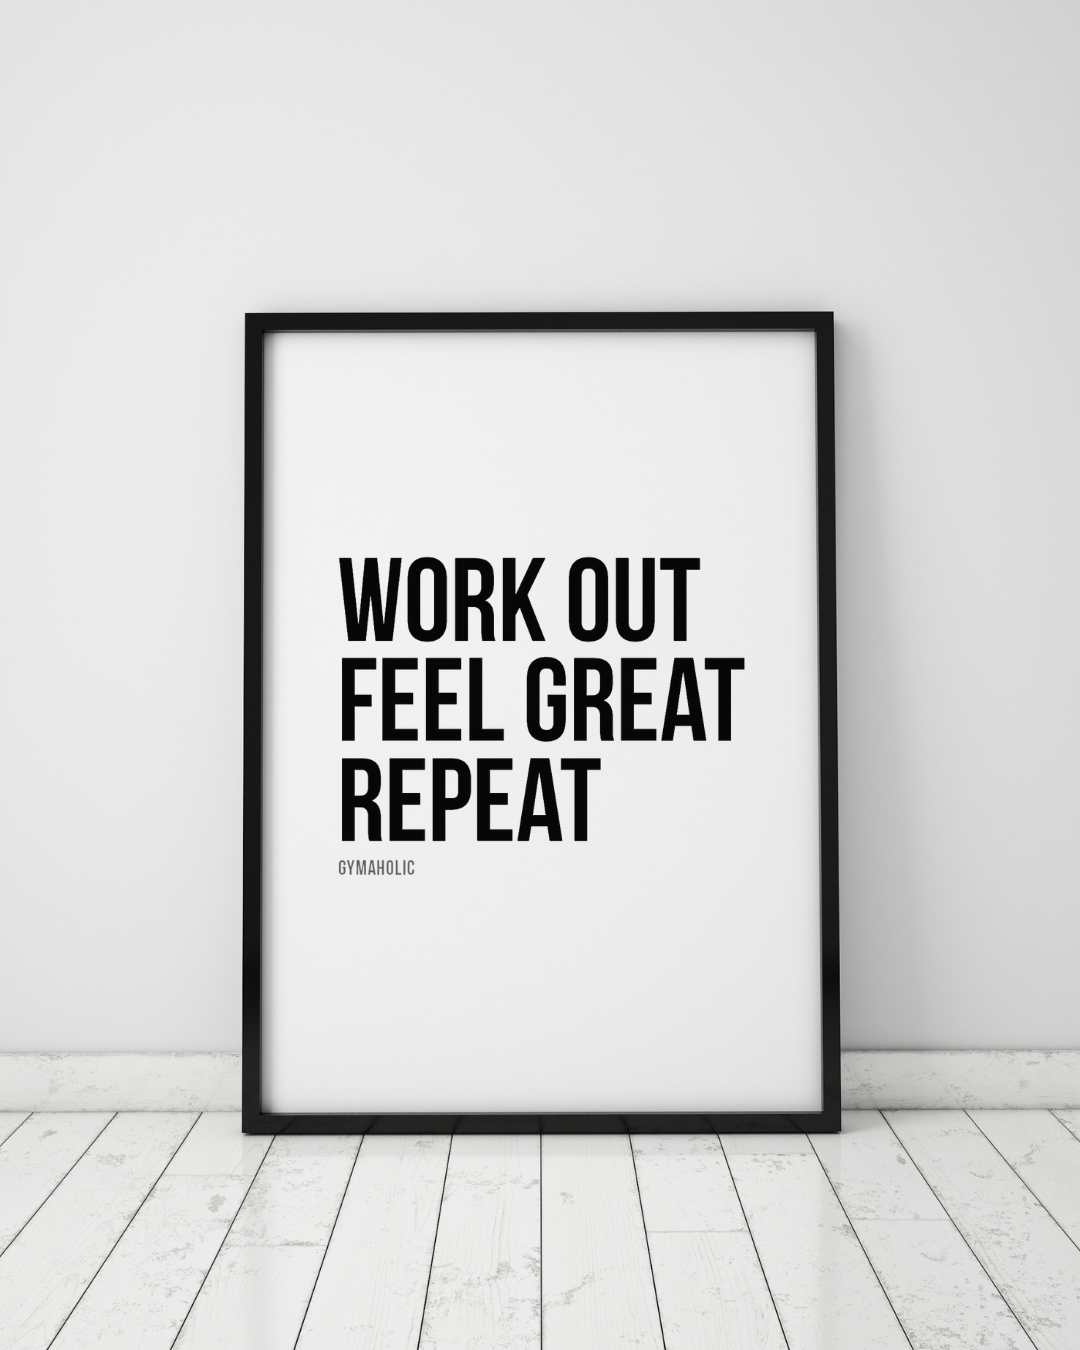 Workout. Feel great. Repeat. #gymaholic